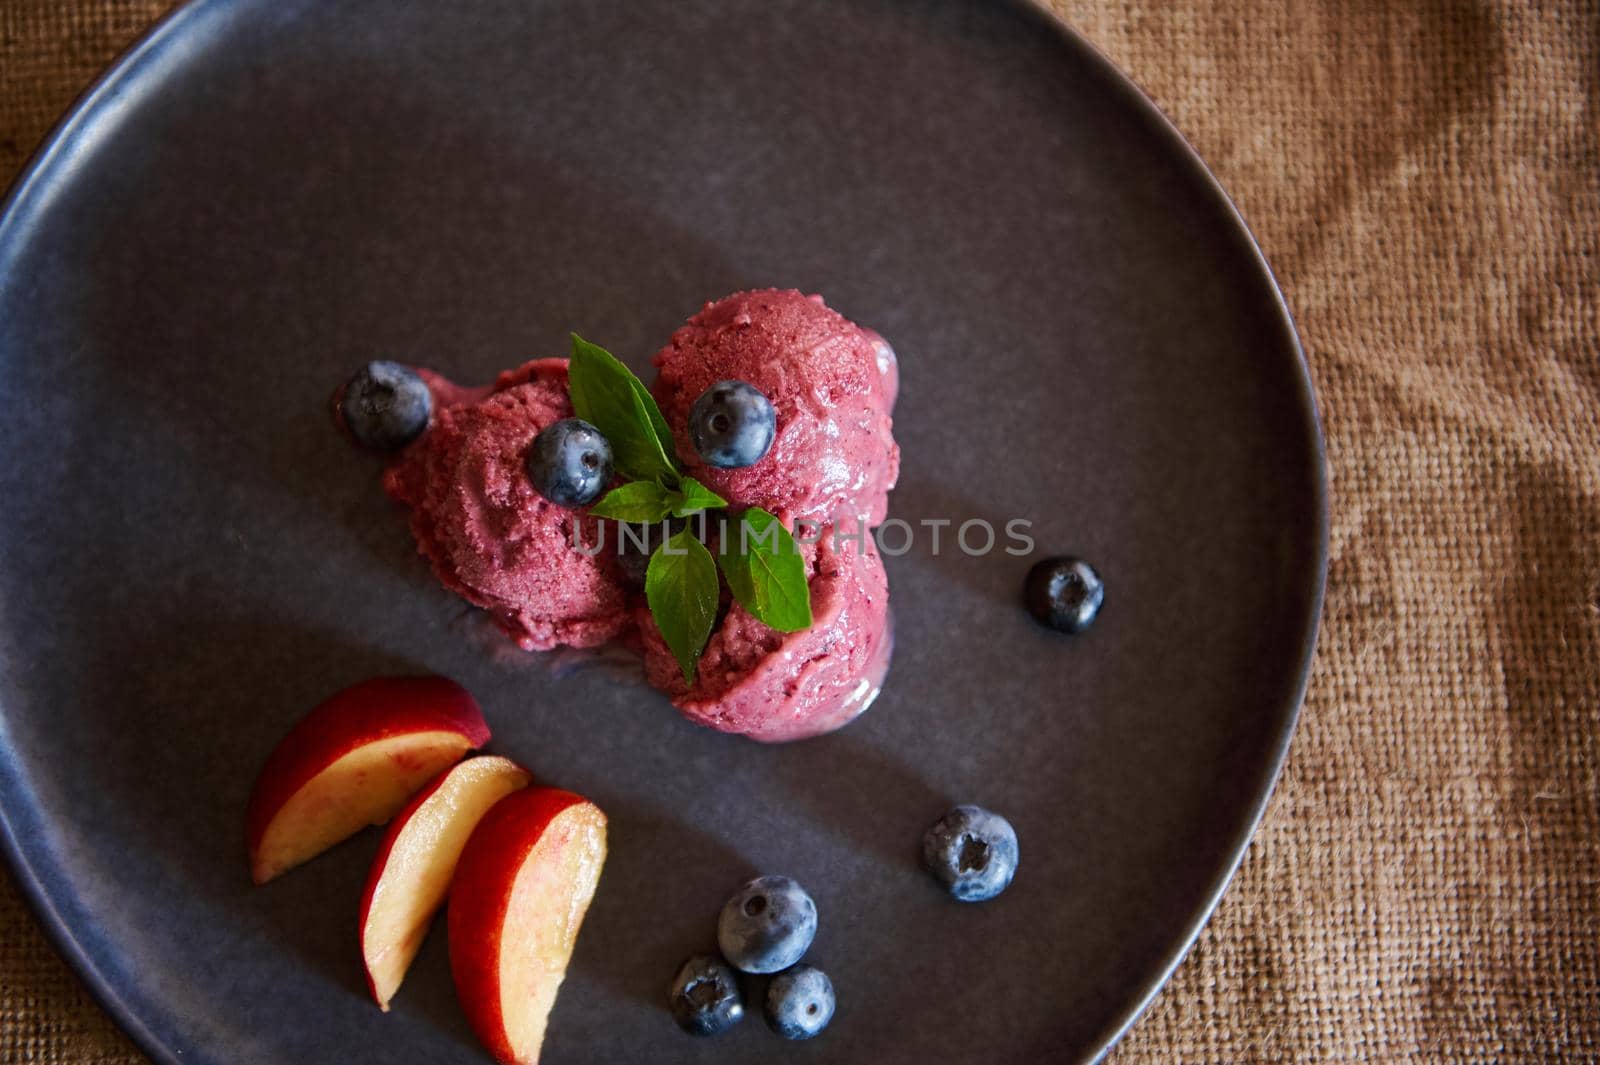 Flat lay. Healthy, sweet, raw vegan homemade dessert for refreshment on hot summer days. Refreshing blueberry sorbet, ice cream with slices of ripe juicy peach, blueberries and mint leaves. Copy space